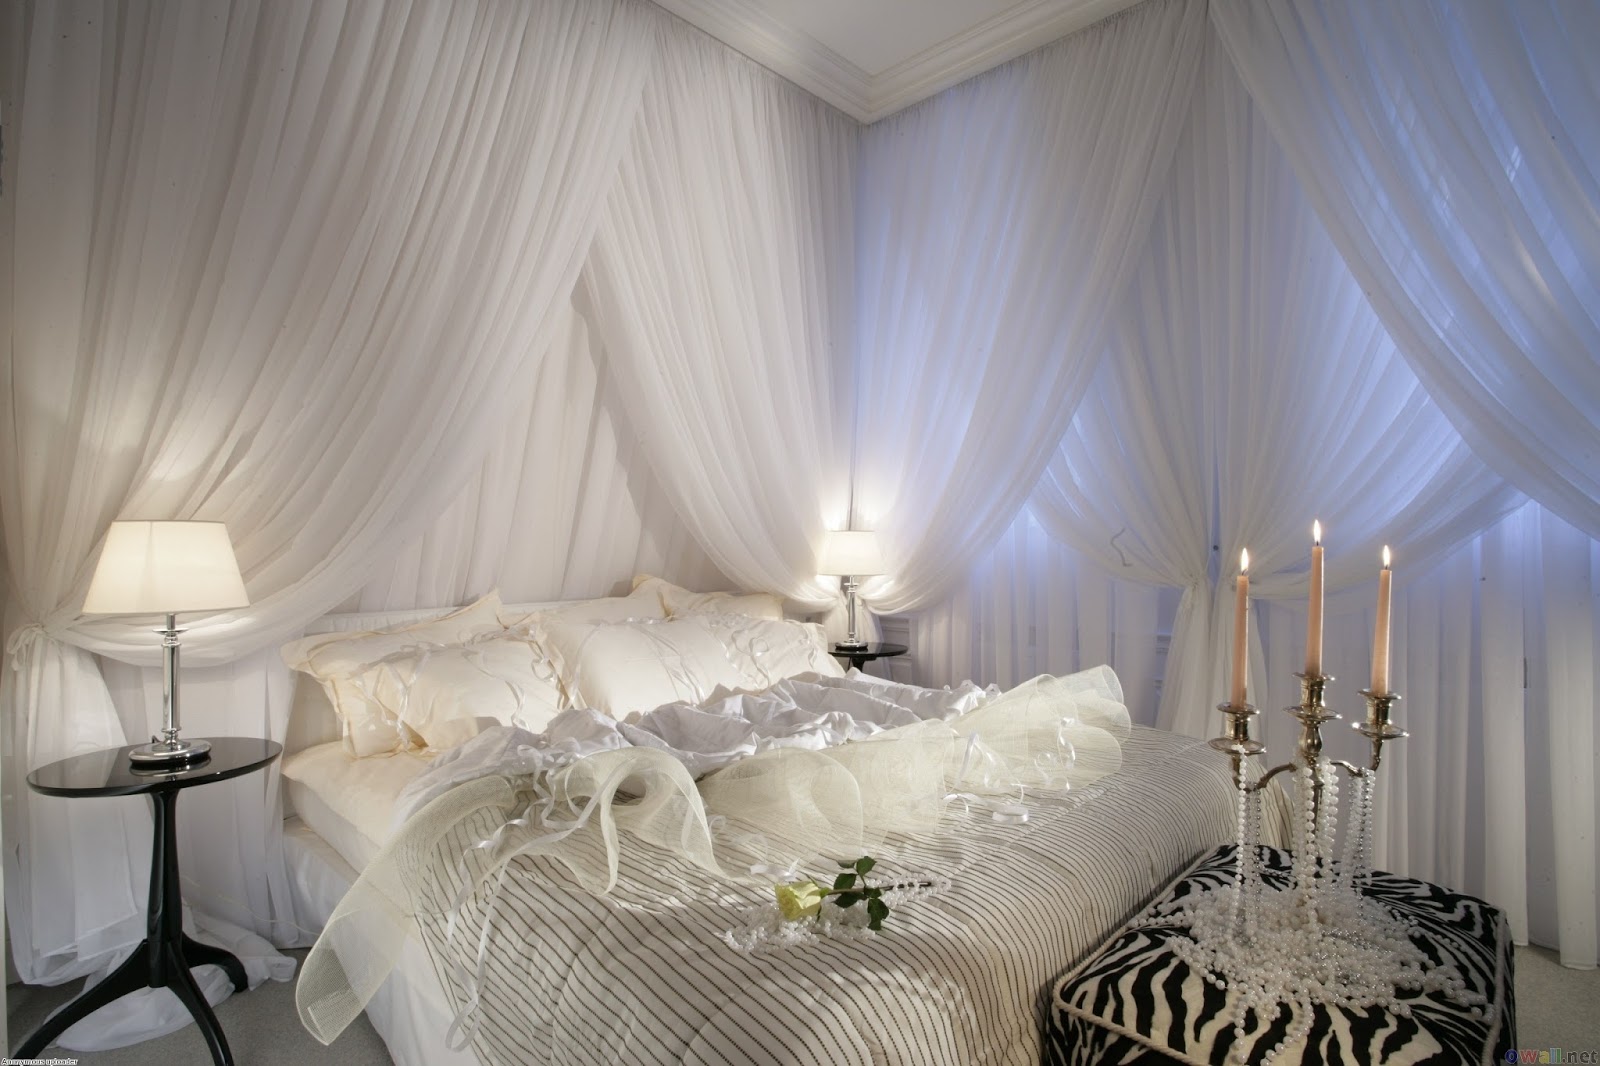 How to Improve the Interior Design of your Bedroom Curtains Design